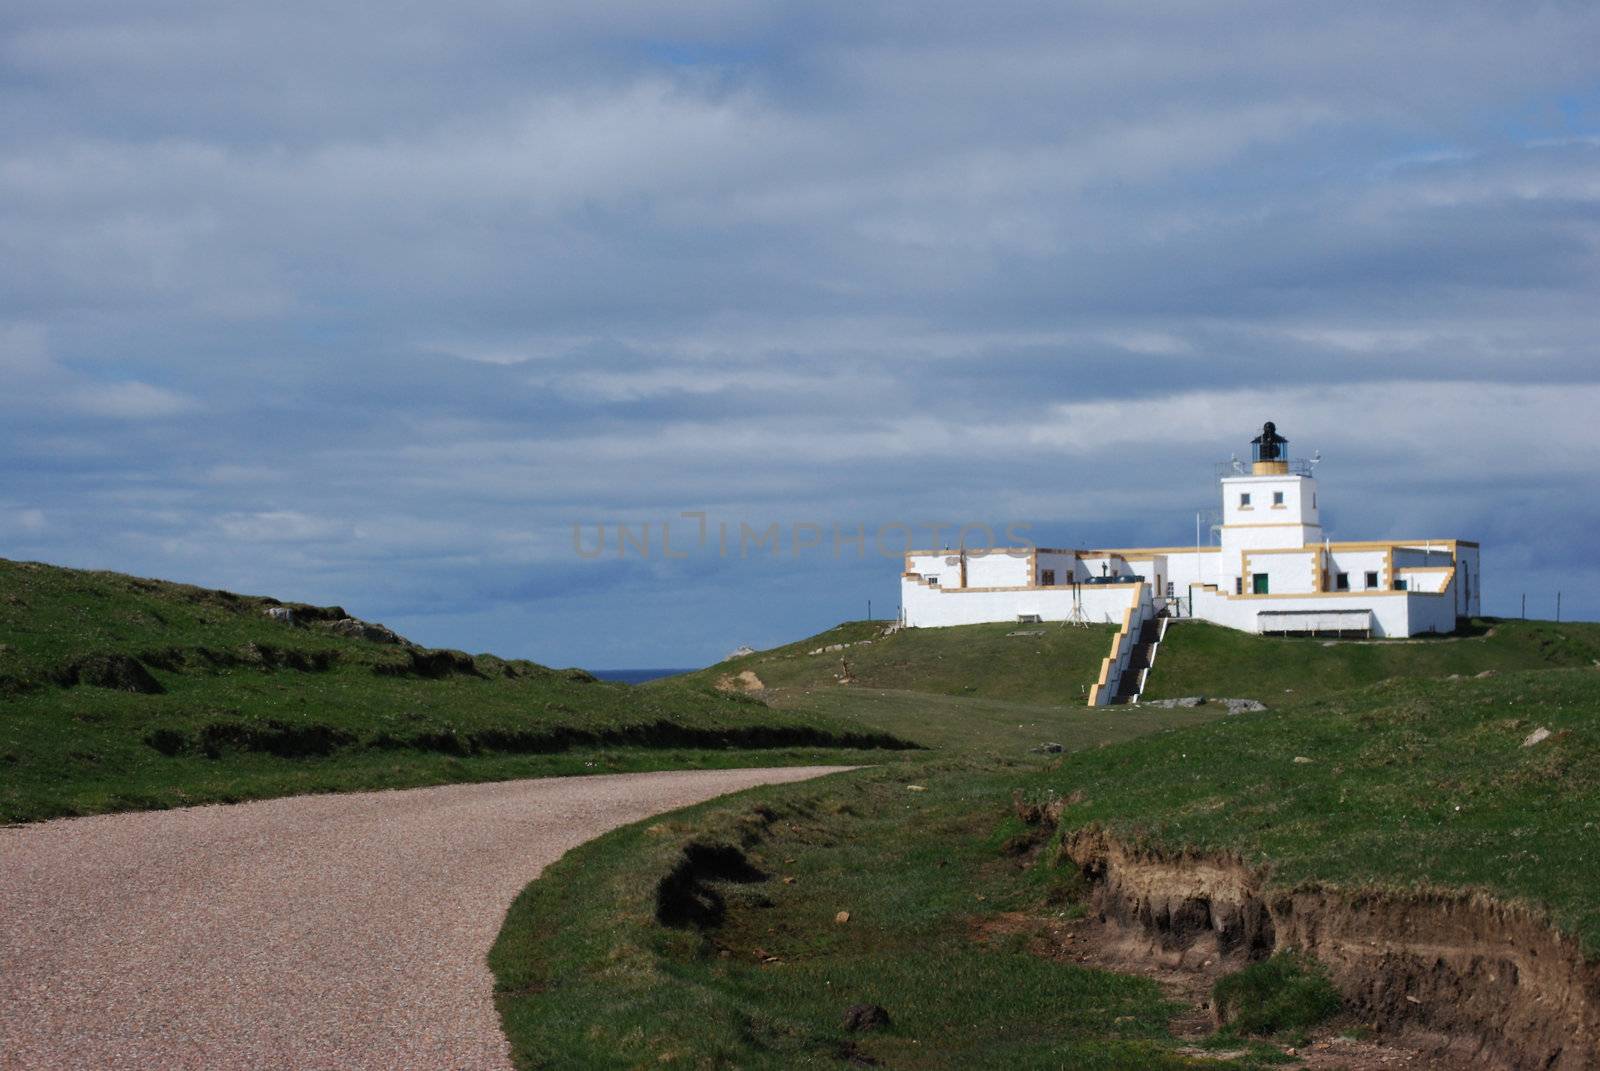 Lighthouse at Dunnet Head, Scotland on a cloudy day